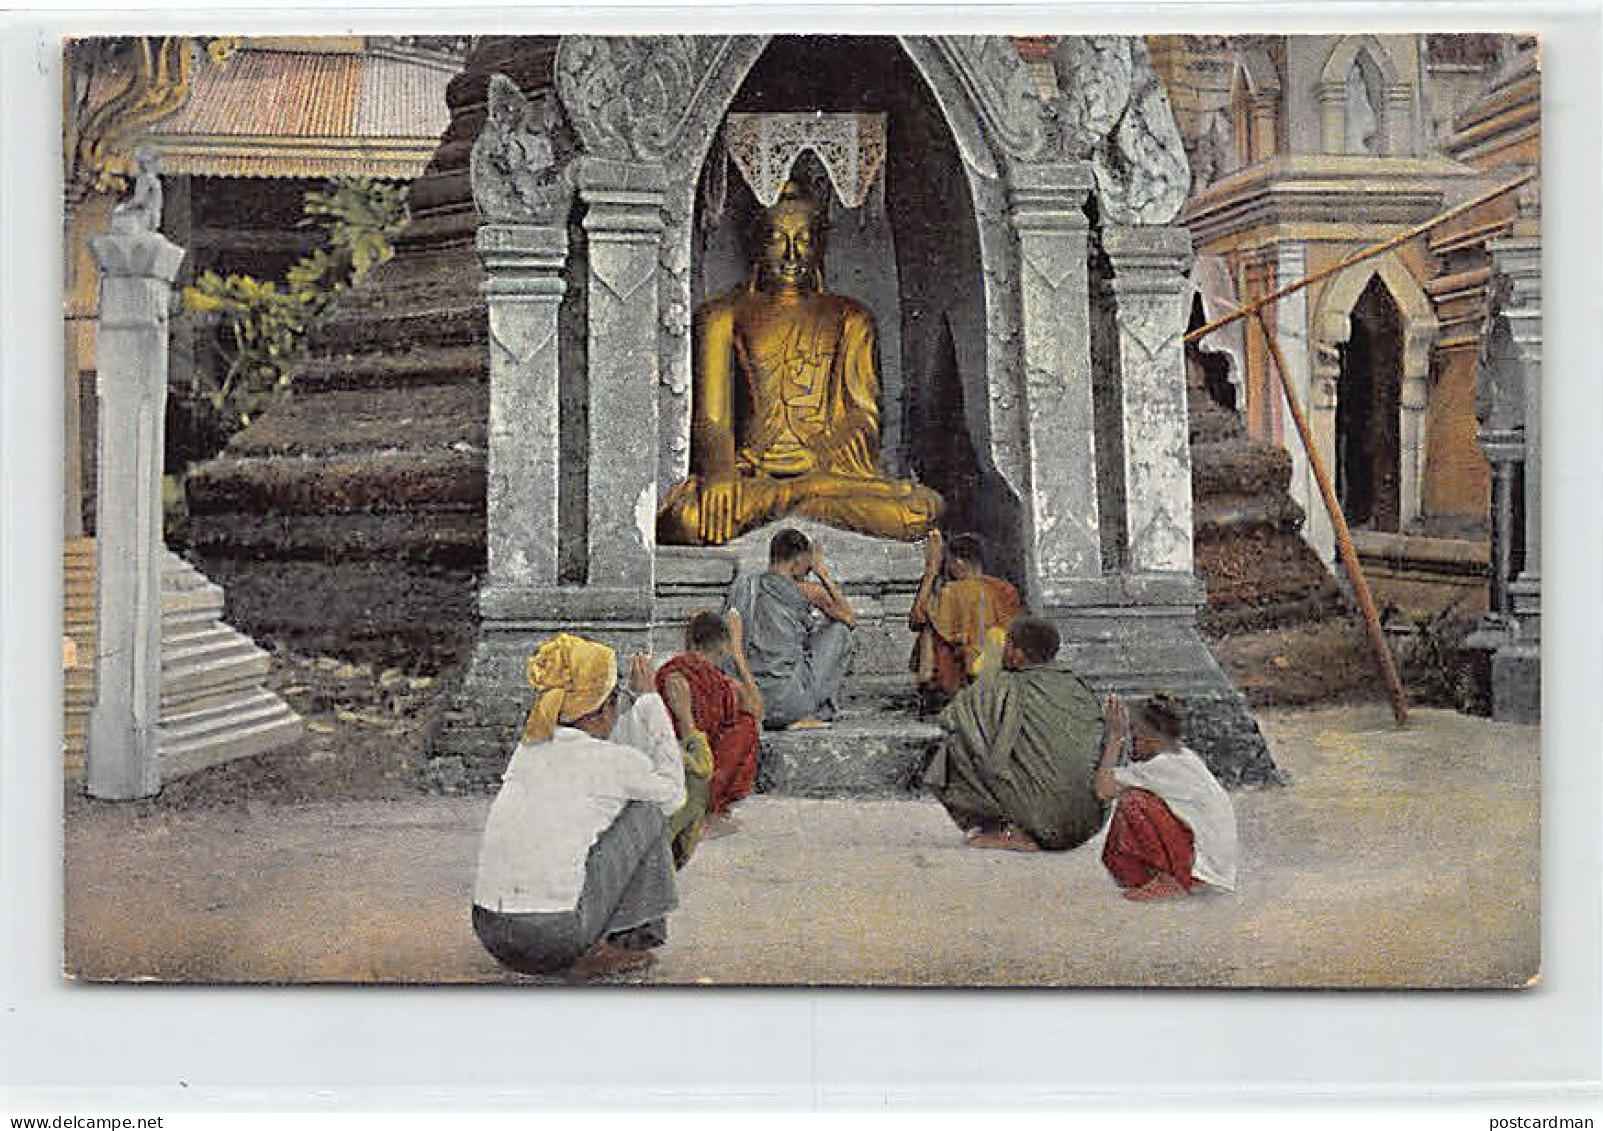 MYANMAR Burma - Buddhists, In Front Of The Idol - Publ. Evang. Luth. Mission Serie Indien II - 1 - Myanmar (Birma)